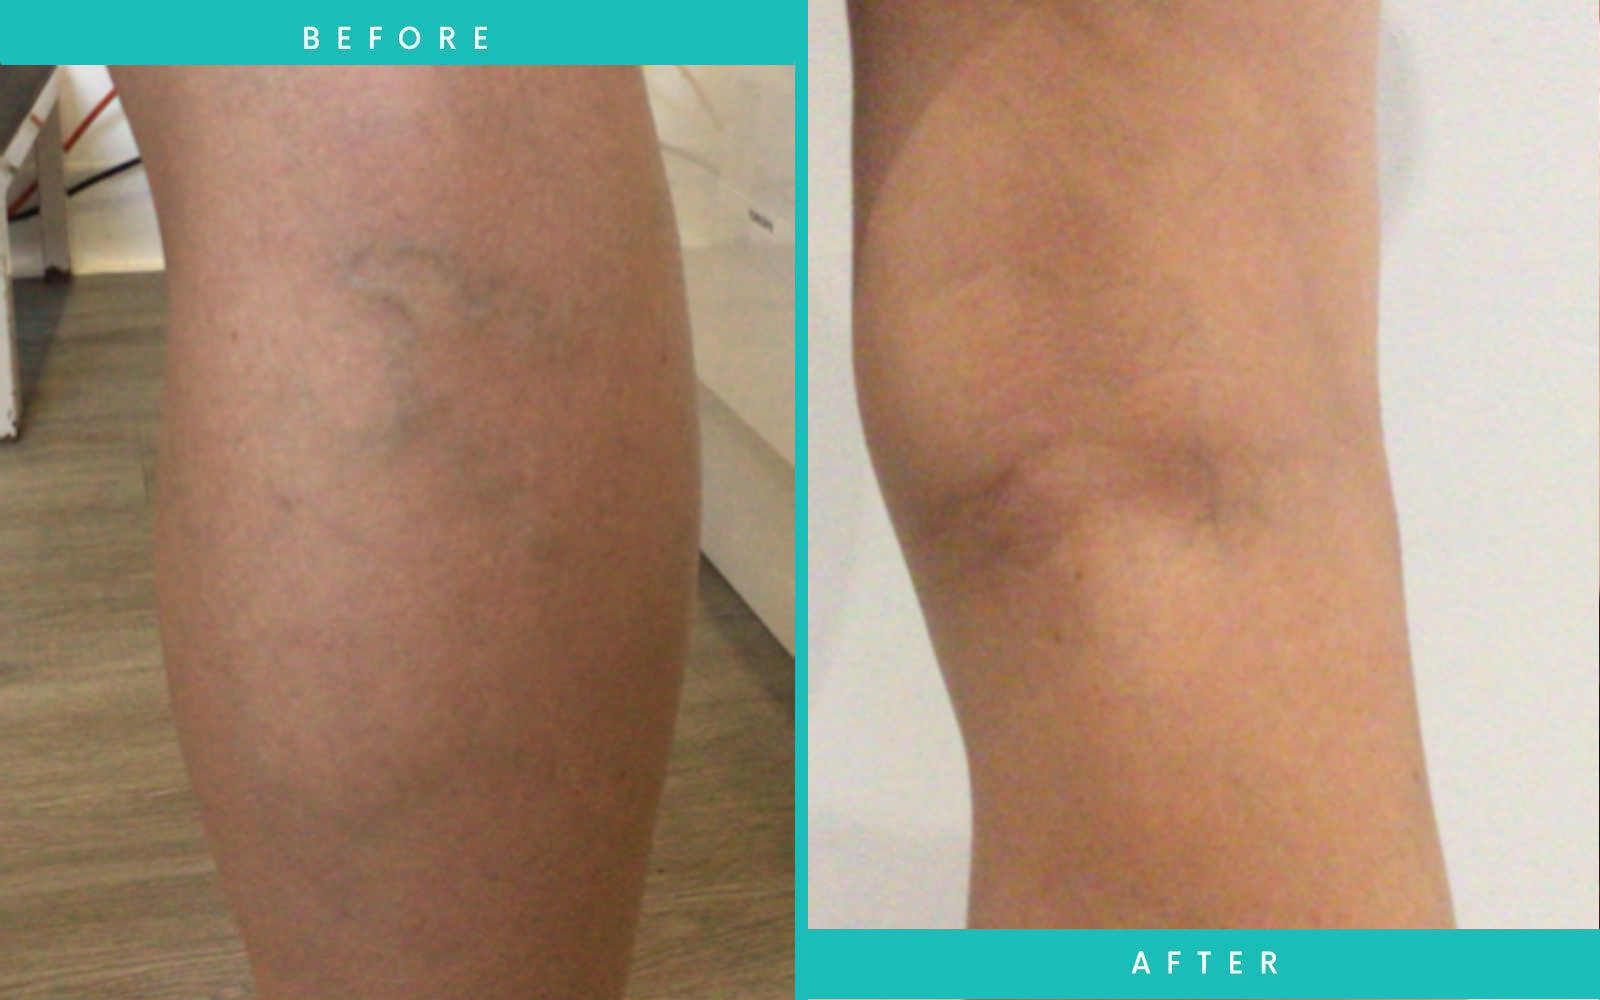 Foam Sclerotherapy Before And After